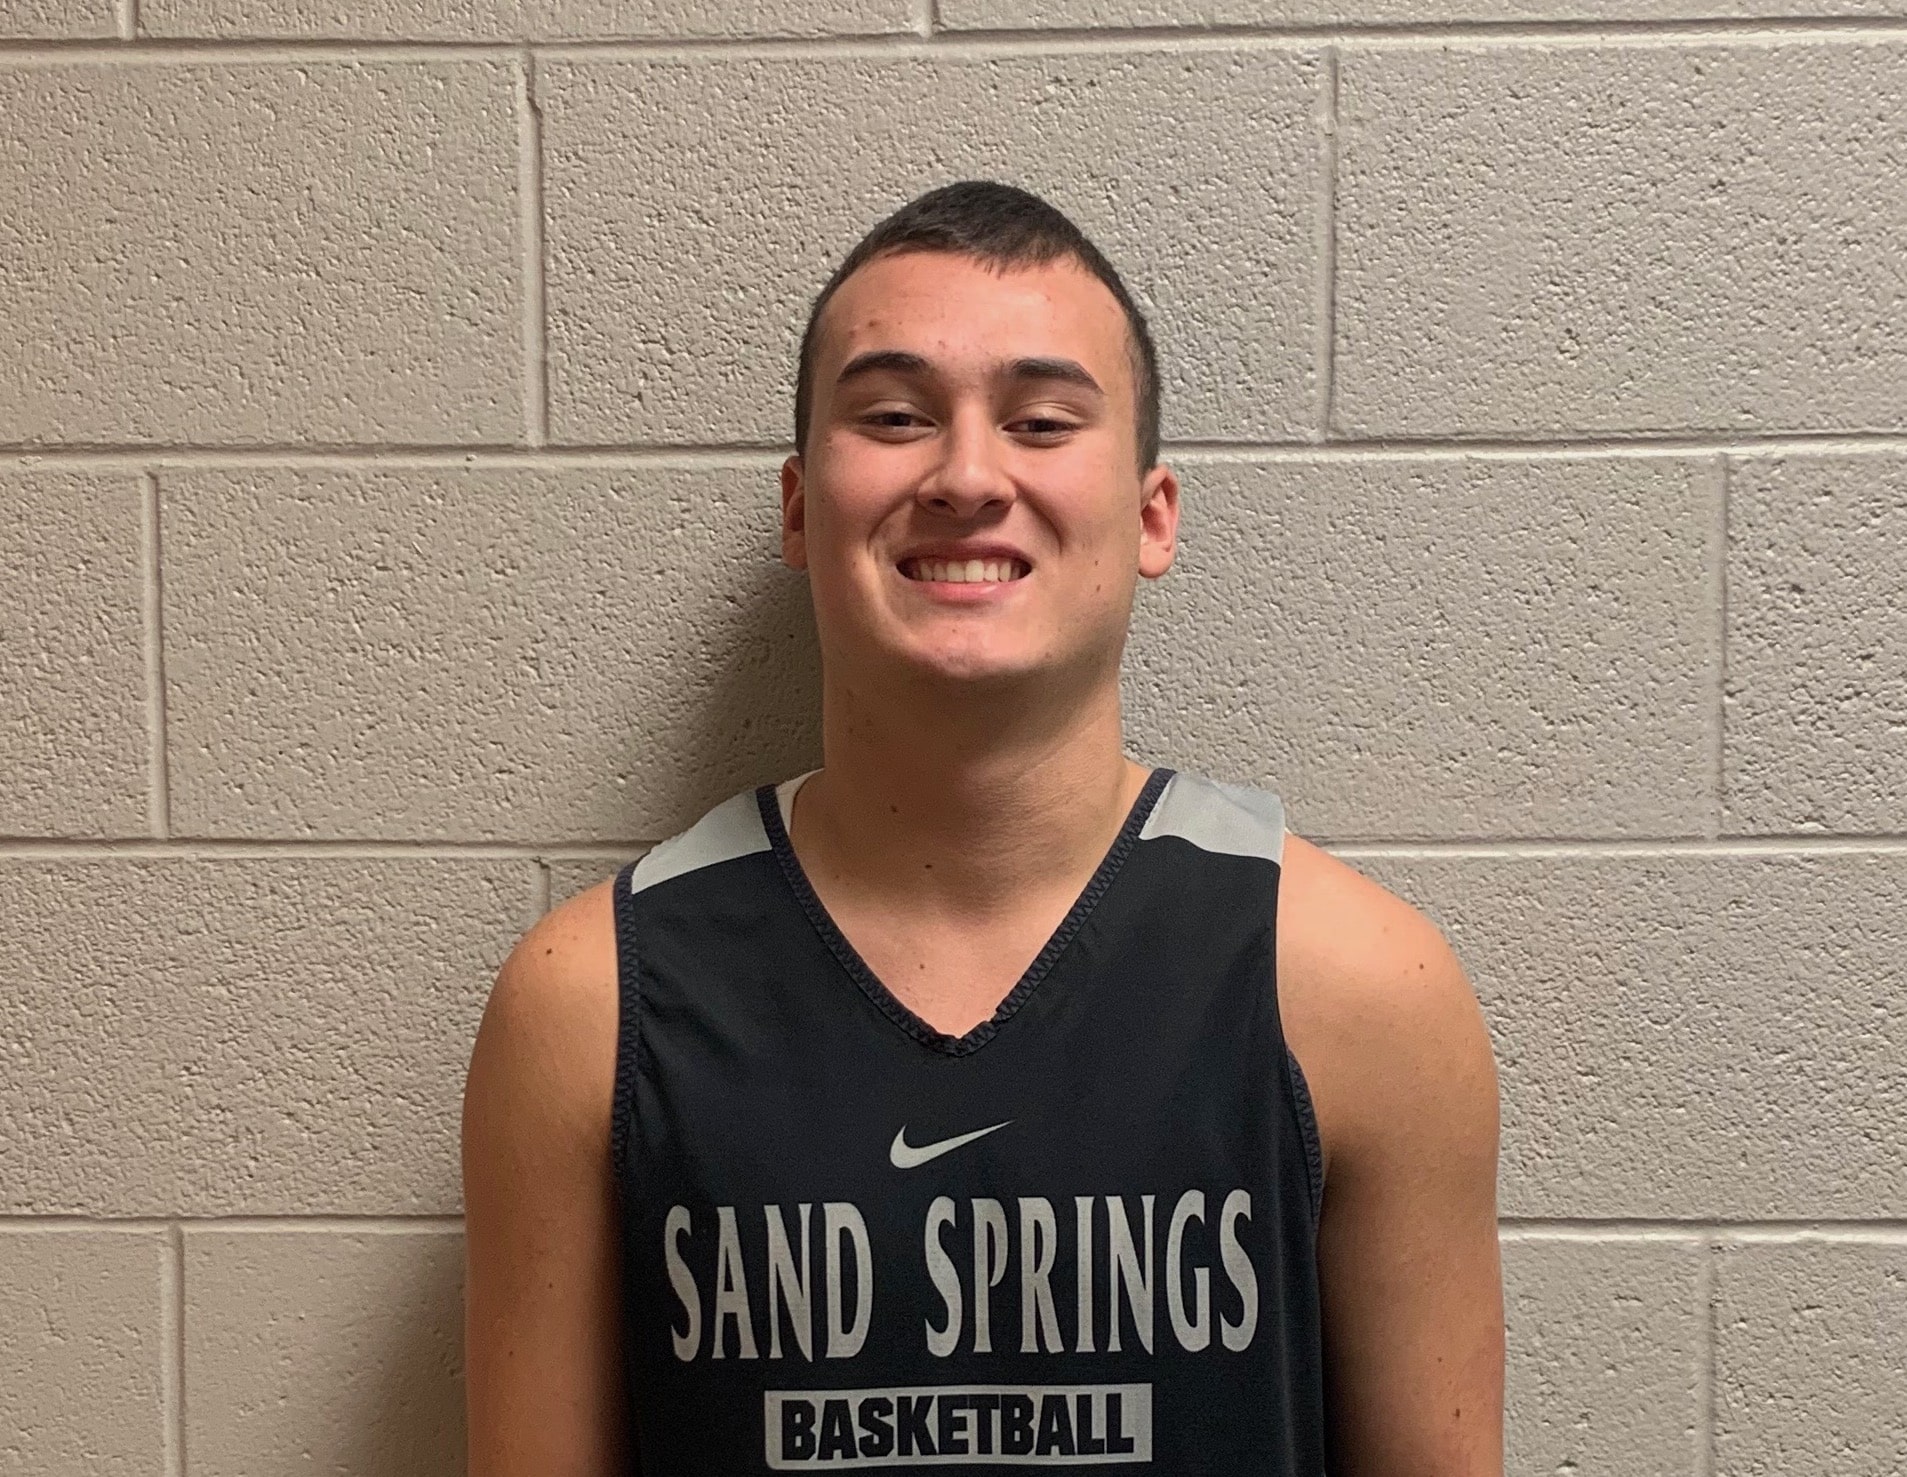 sand-springs-cale-askew-named-vype-unsung-hero-presented-by-eric-davidson-state-farm-sand